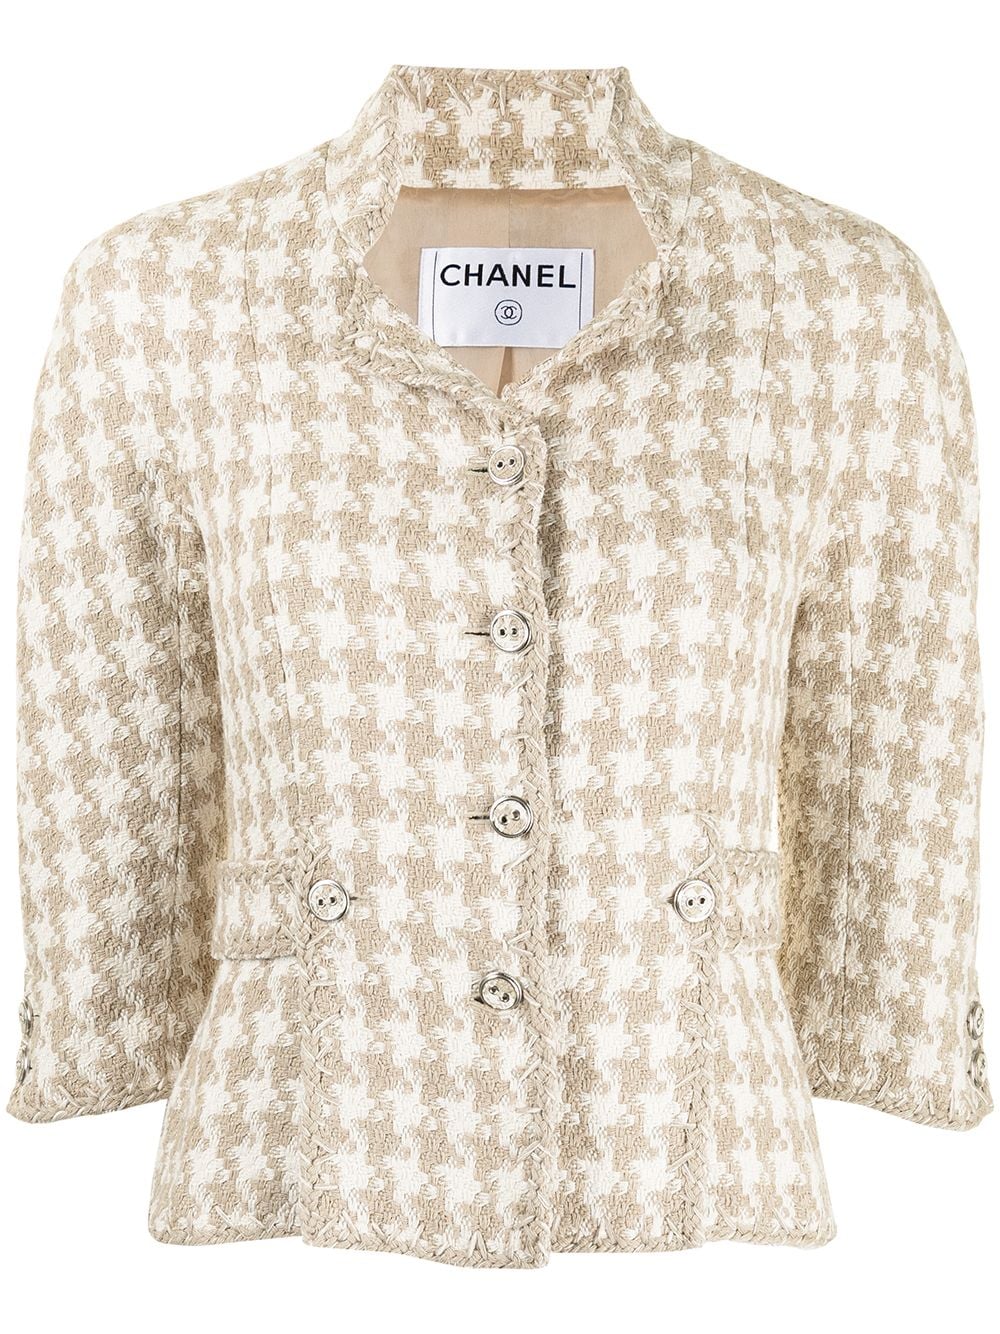 Chanel Chanel Pre-Owned 2000s Cropped Tweed Jacket - Farfetch